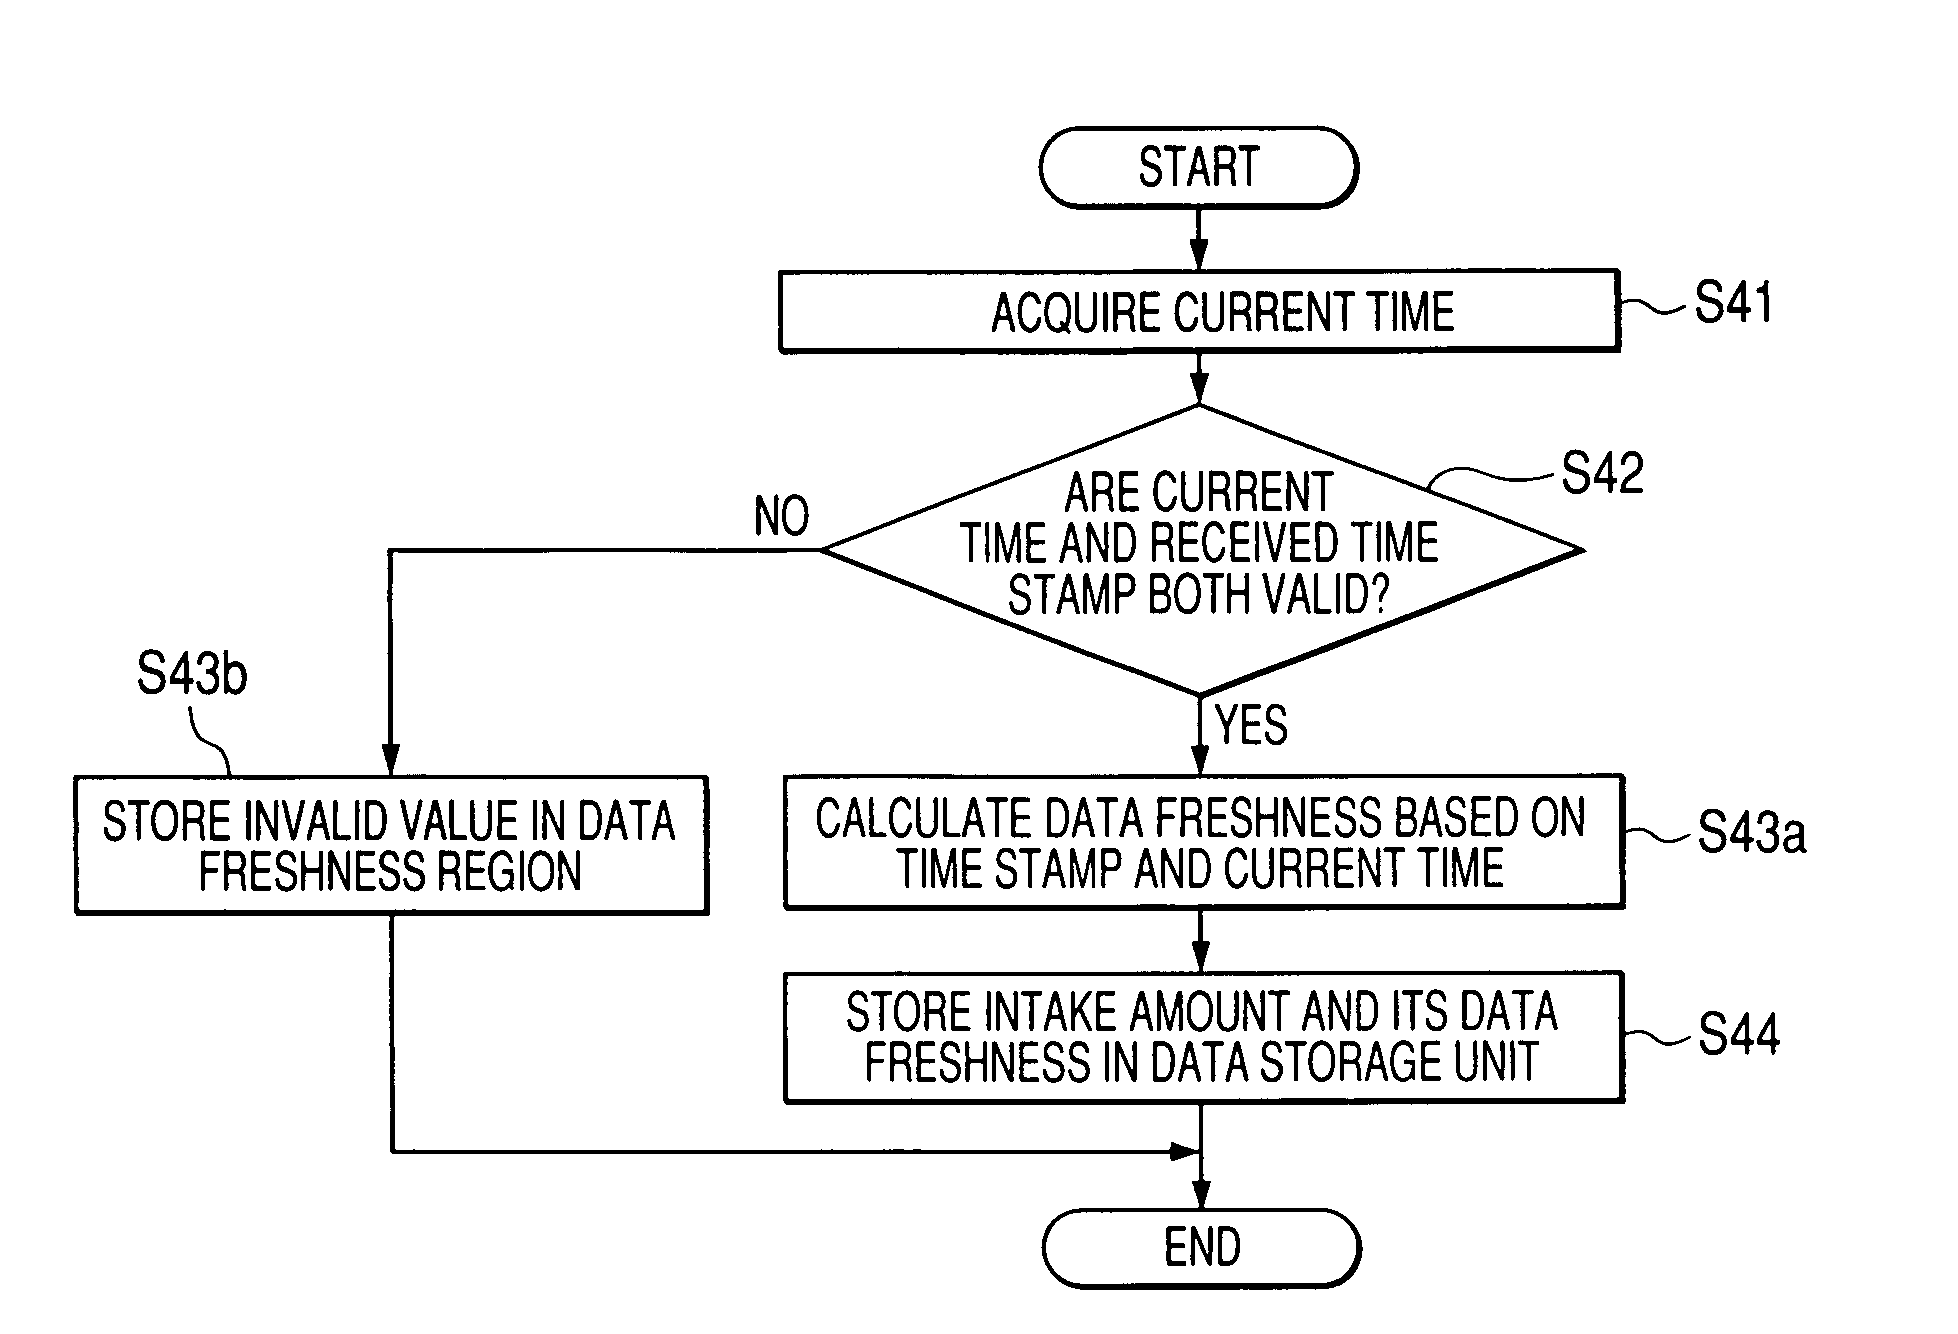 Electronic control units for controlling in-vehicle devices using time-dependent data and vehicle control system integrating such units for real-time distributed control